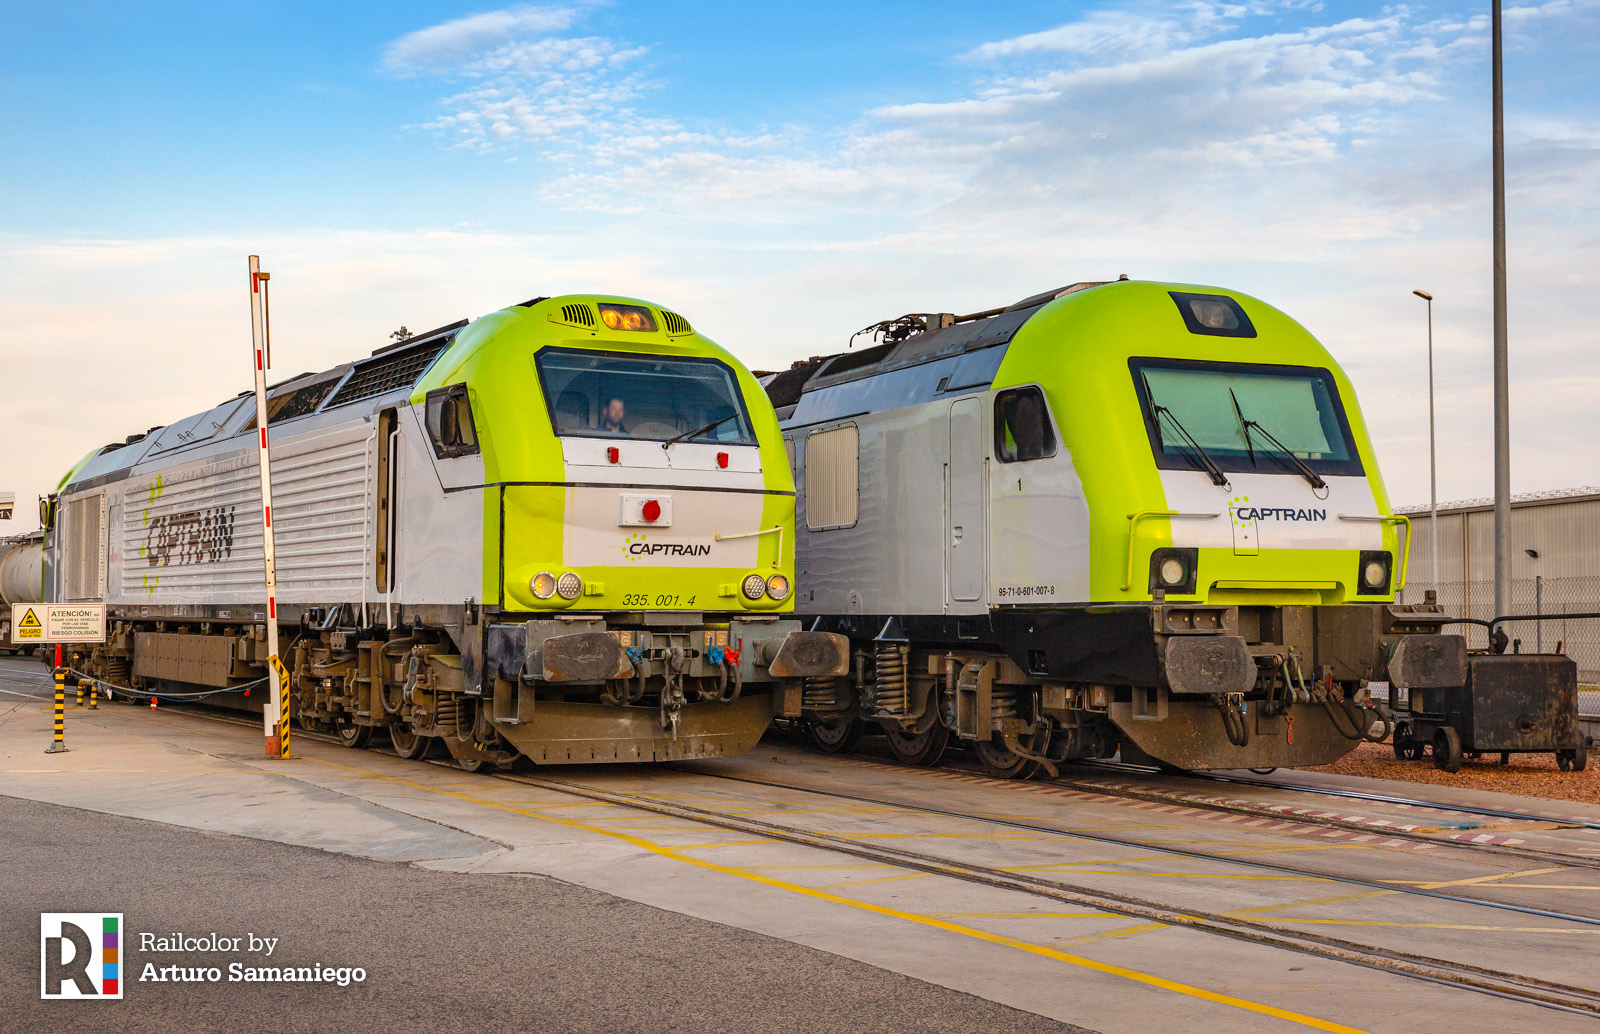 Es Expert The First And Second Euro 4000 In Captrain Livery Updated X2 Railcolor News